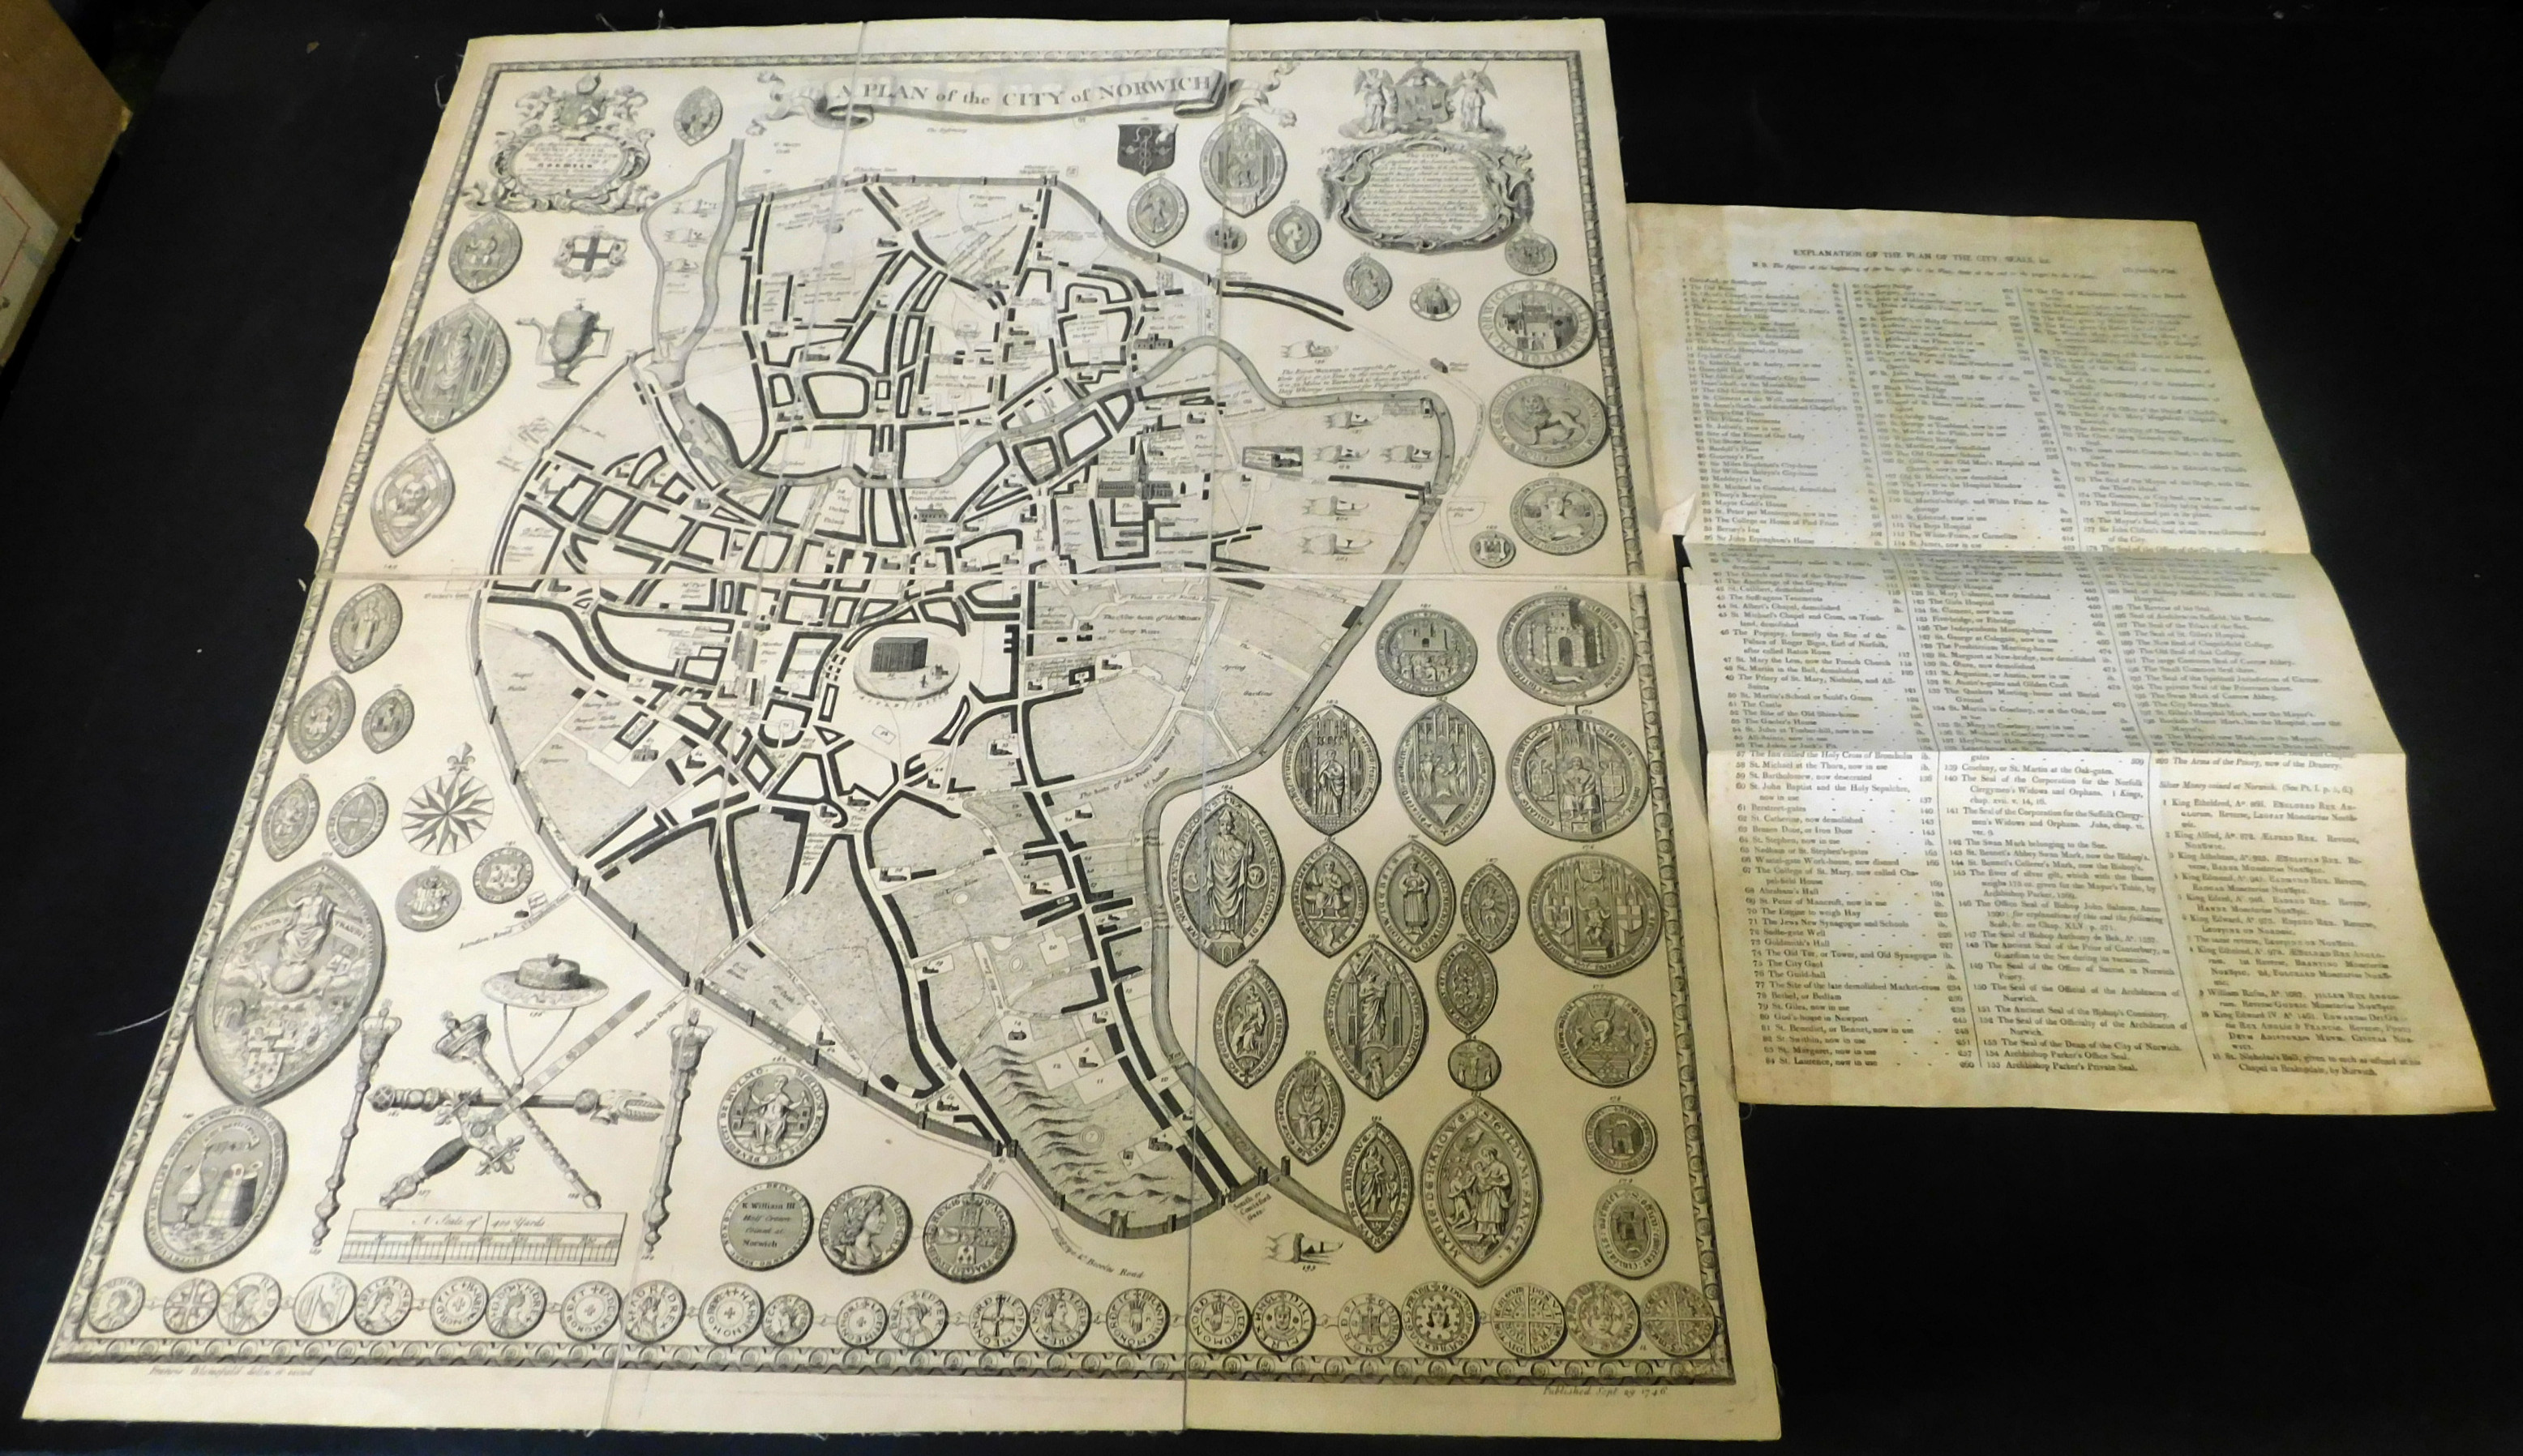 PLAN OF THE CITY OF NORWICH, folding engraved plan with ornamental seals, 1746, from BLOMEFIELDS: AN